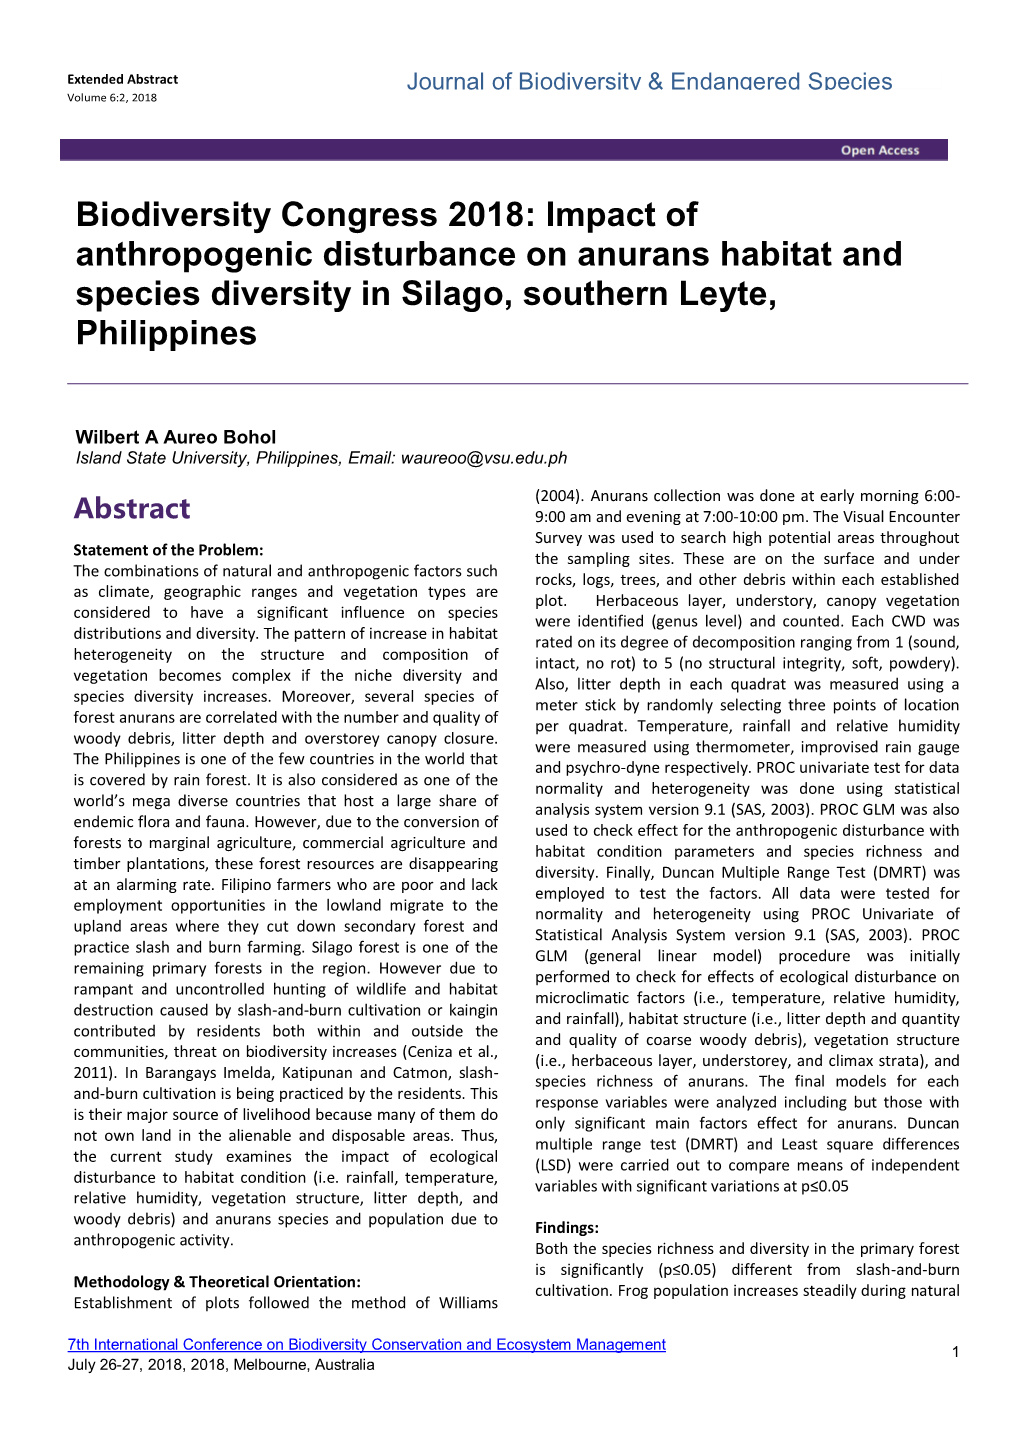 Impact of Anthropogenic Disturbance on Anurans Habitat and Species Diversity in Silago, Southern Leyte, Philippines